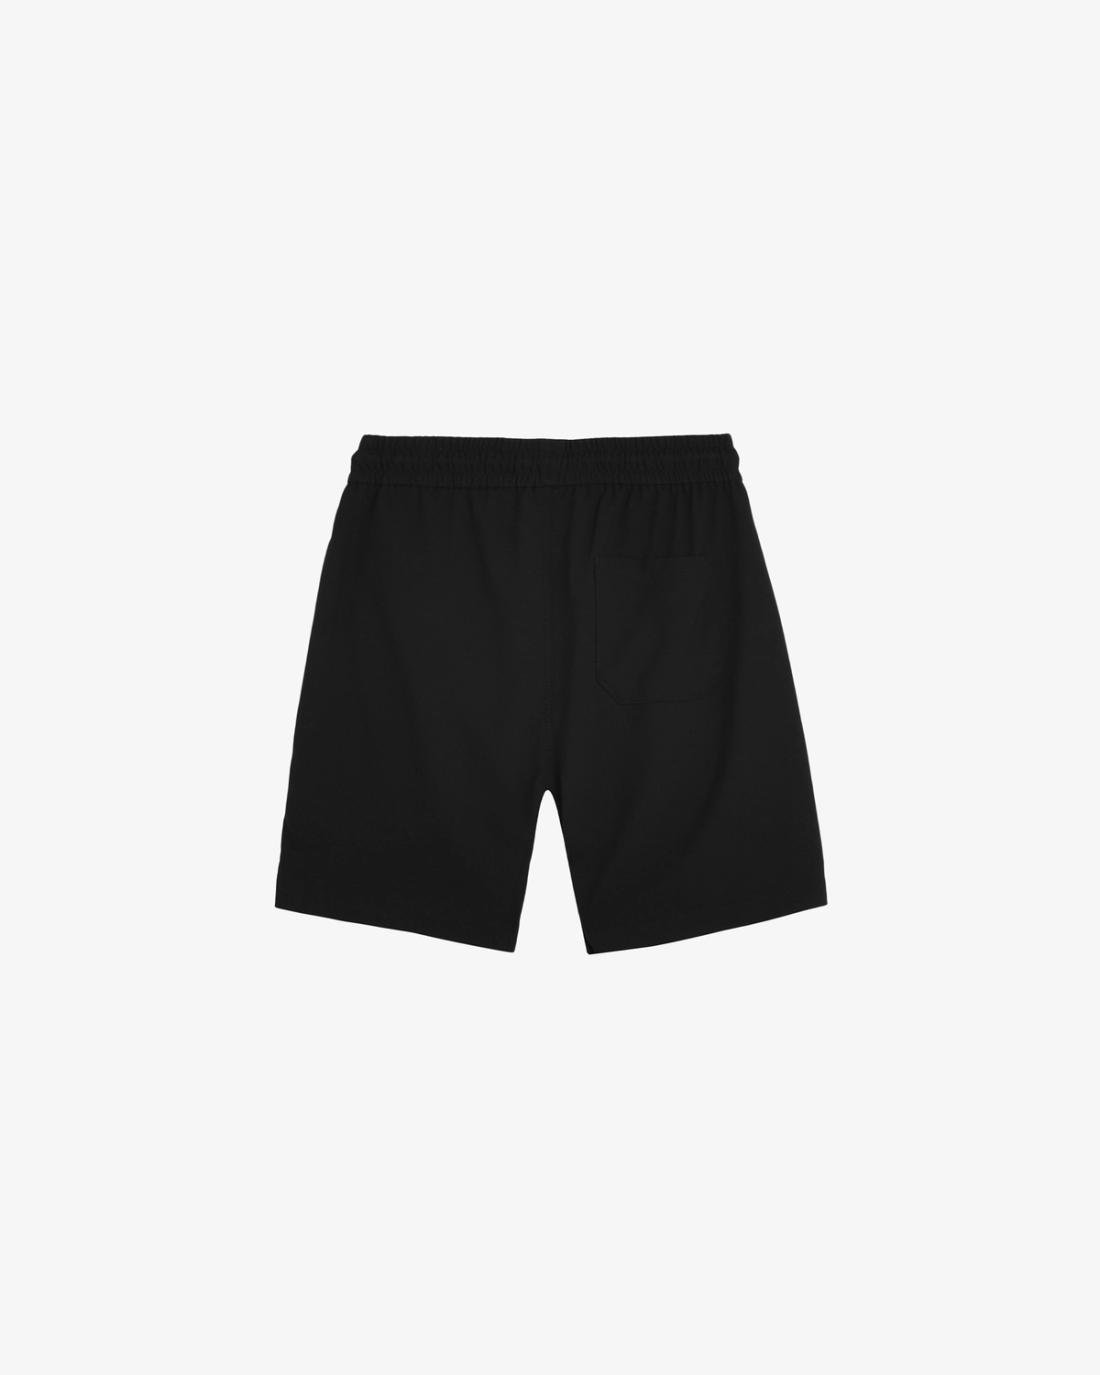 The Proper Shorts | c'est normal - Around here.